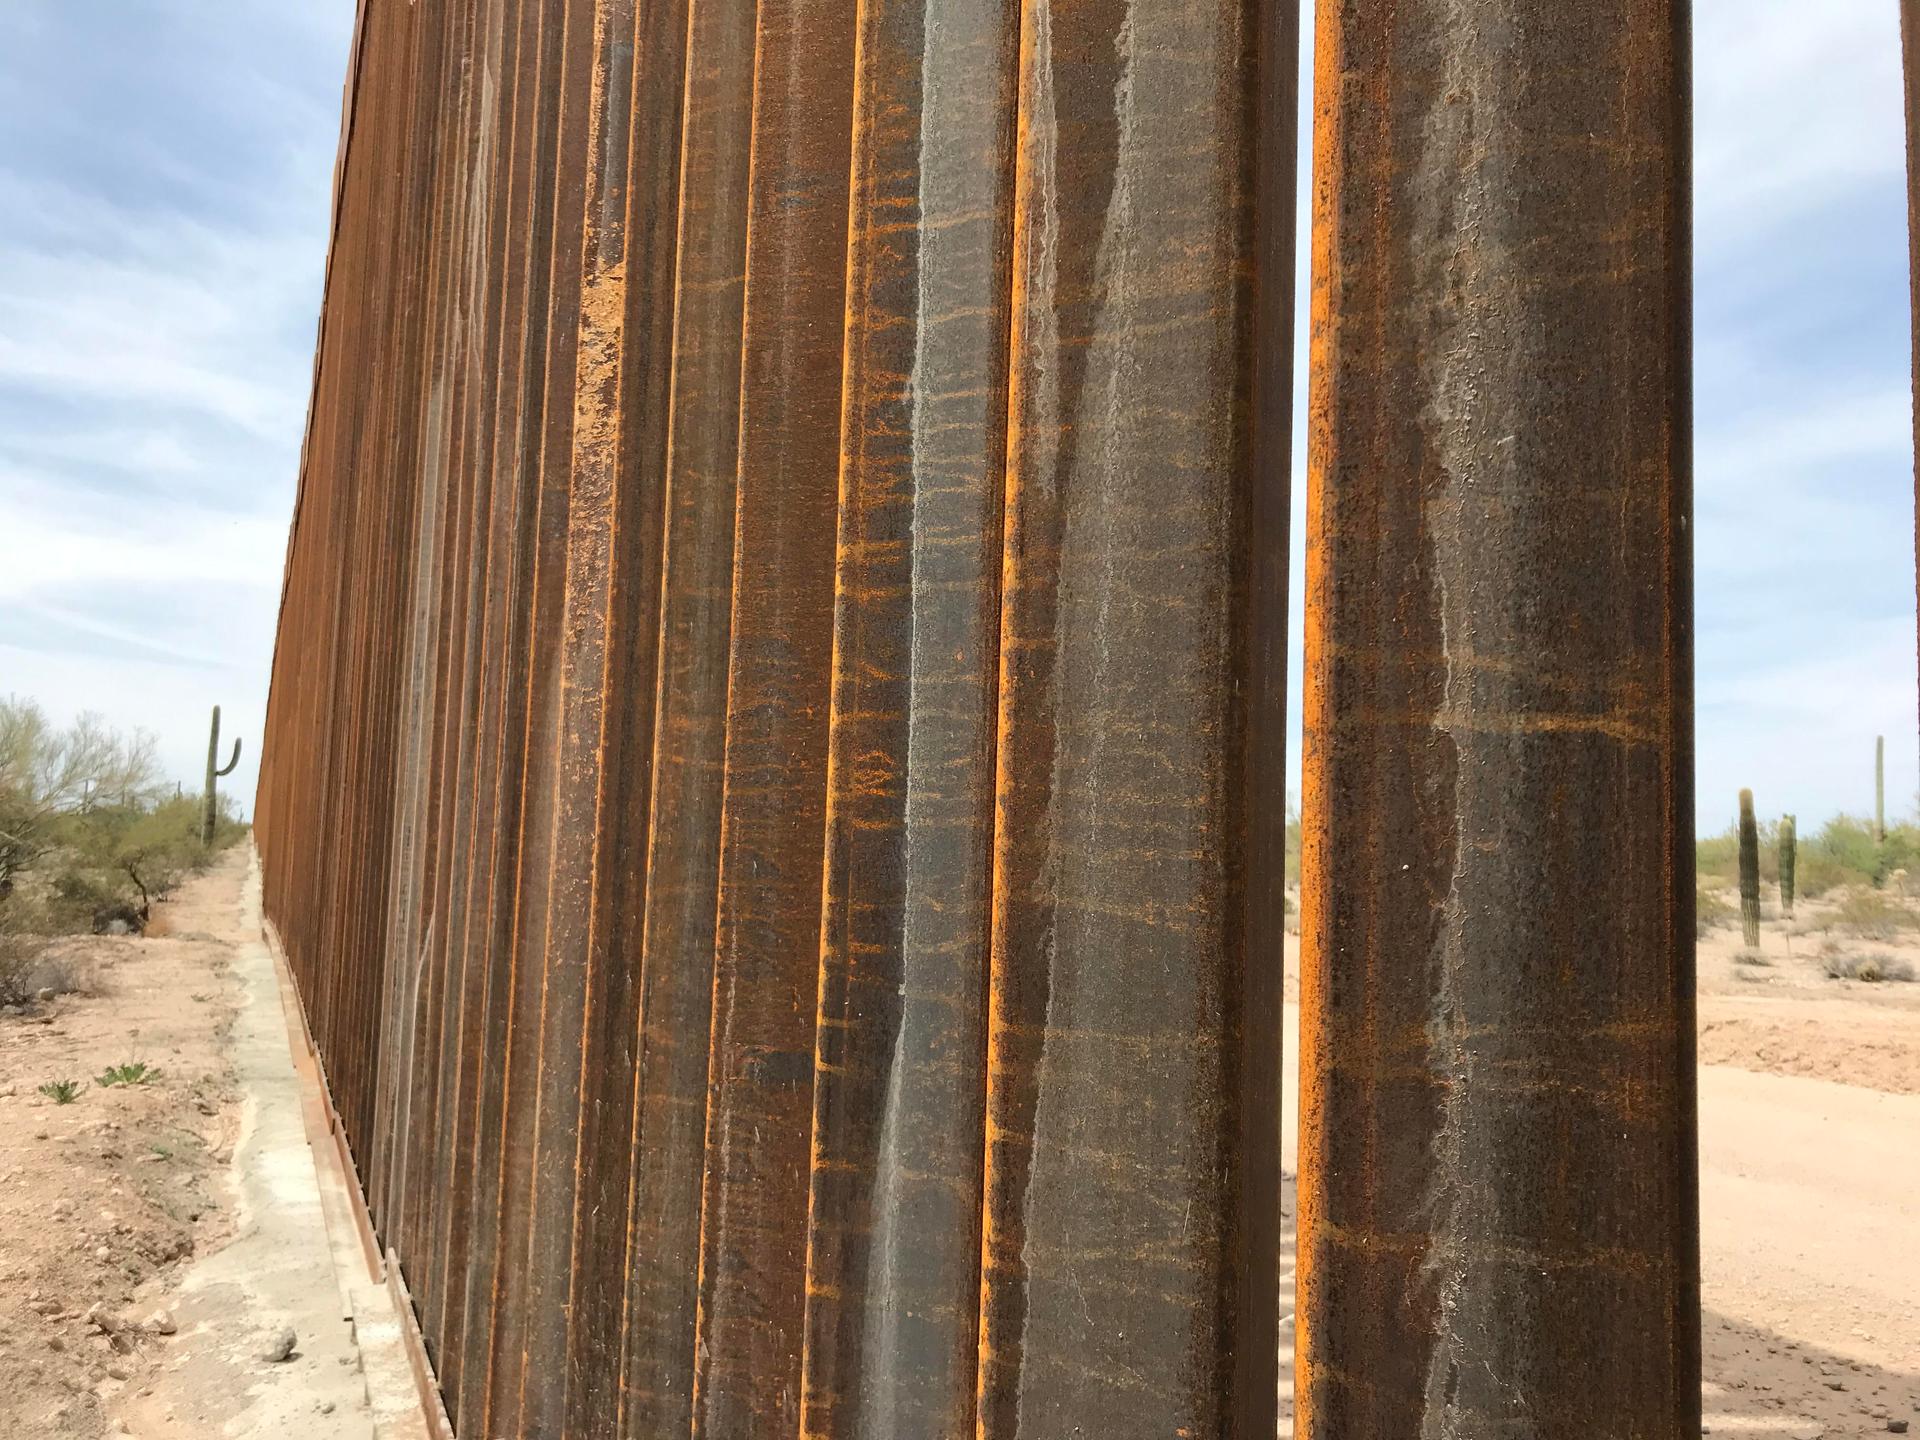 A view from the Mexican side of a 30-foot border wall, peeking through the slabs to show the US side of the border.